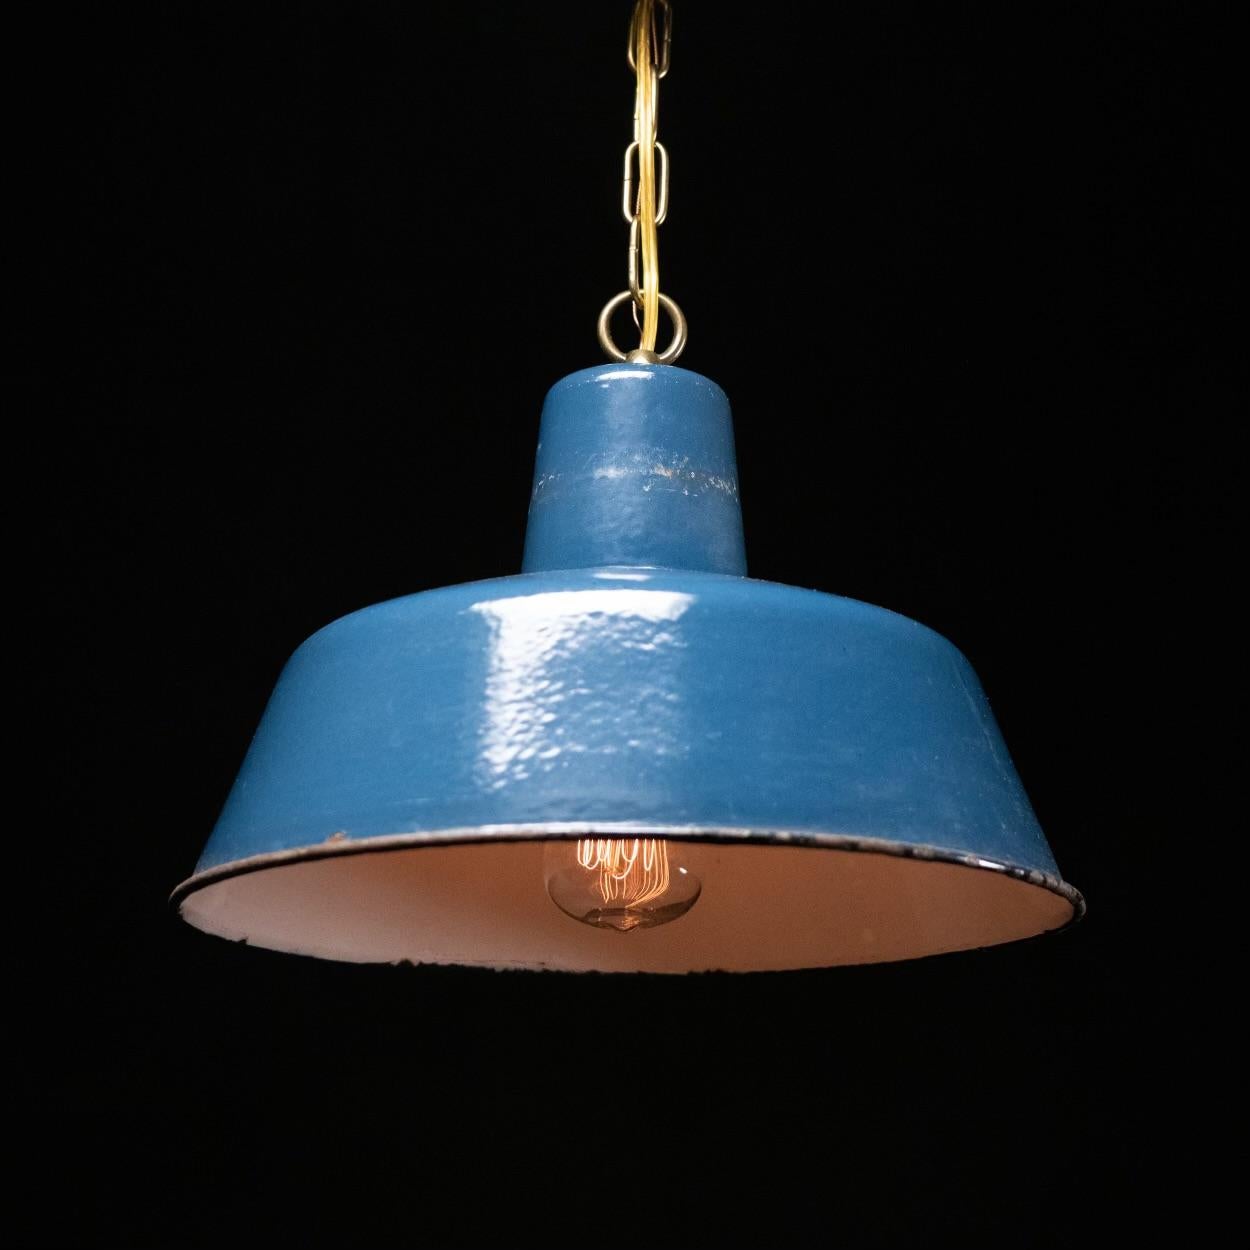 Sometimes its all about colour and form ... fantastic blue enamel , compact form on this factory European pendants ..they are rewired and ready for easy install for standard bulb size.
Priced per individual item. All lamps have been made suitable by